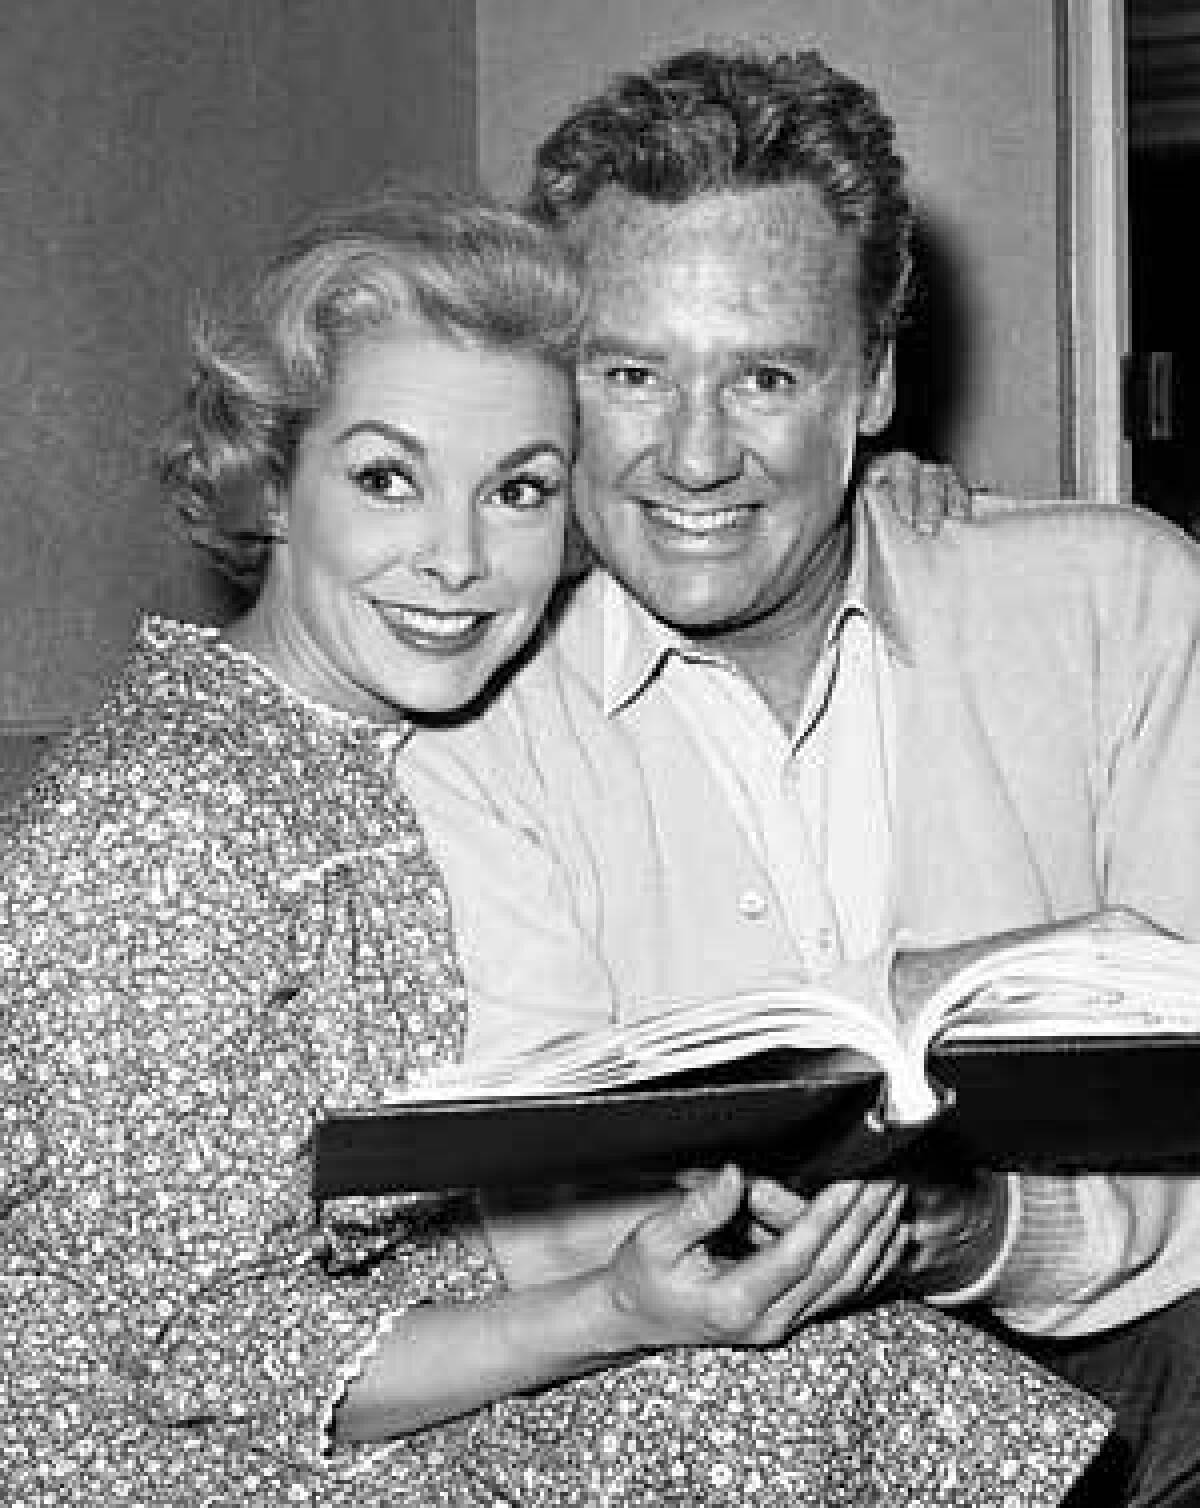 Van Johnson with Janet Leigh during the filming of "Wives and Lovers" in 1963.